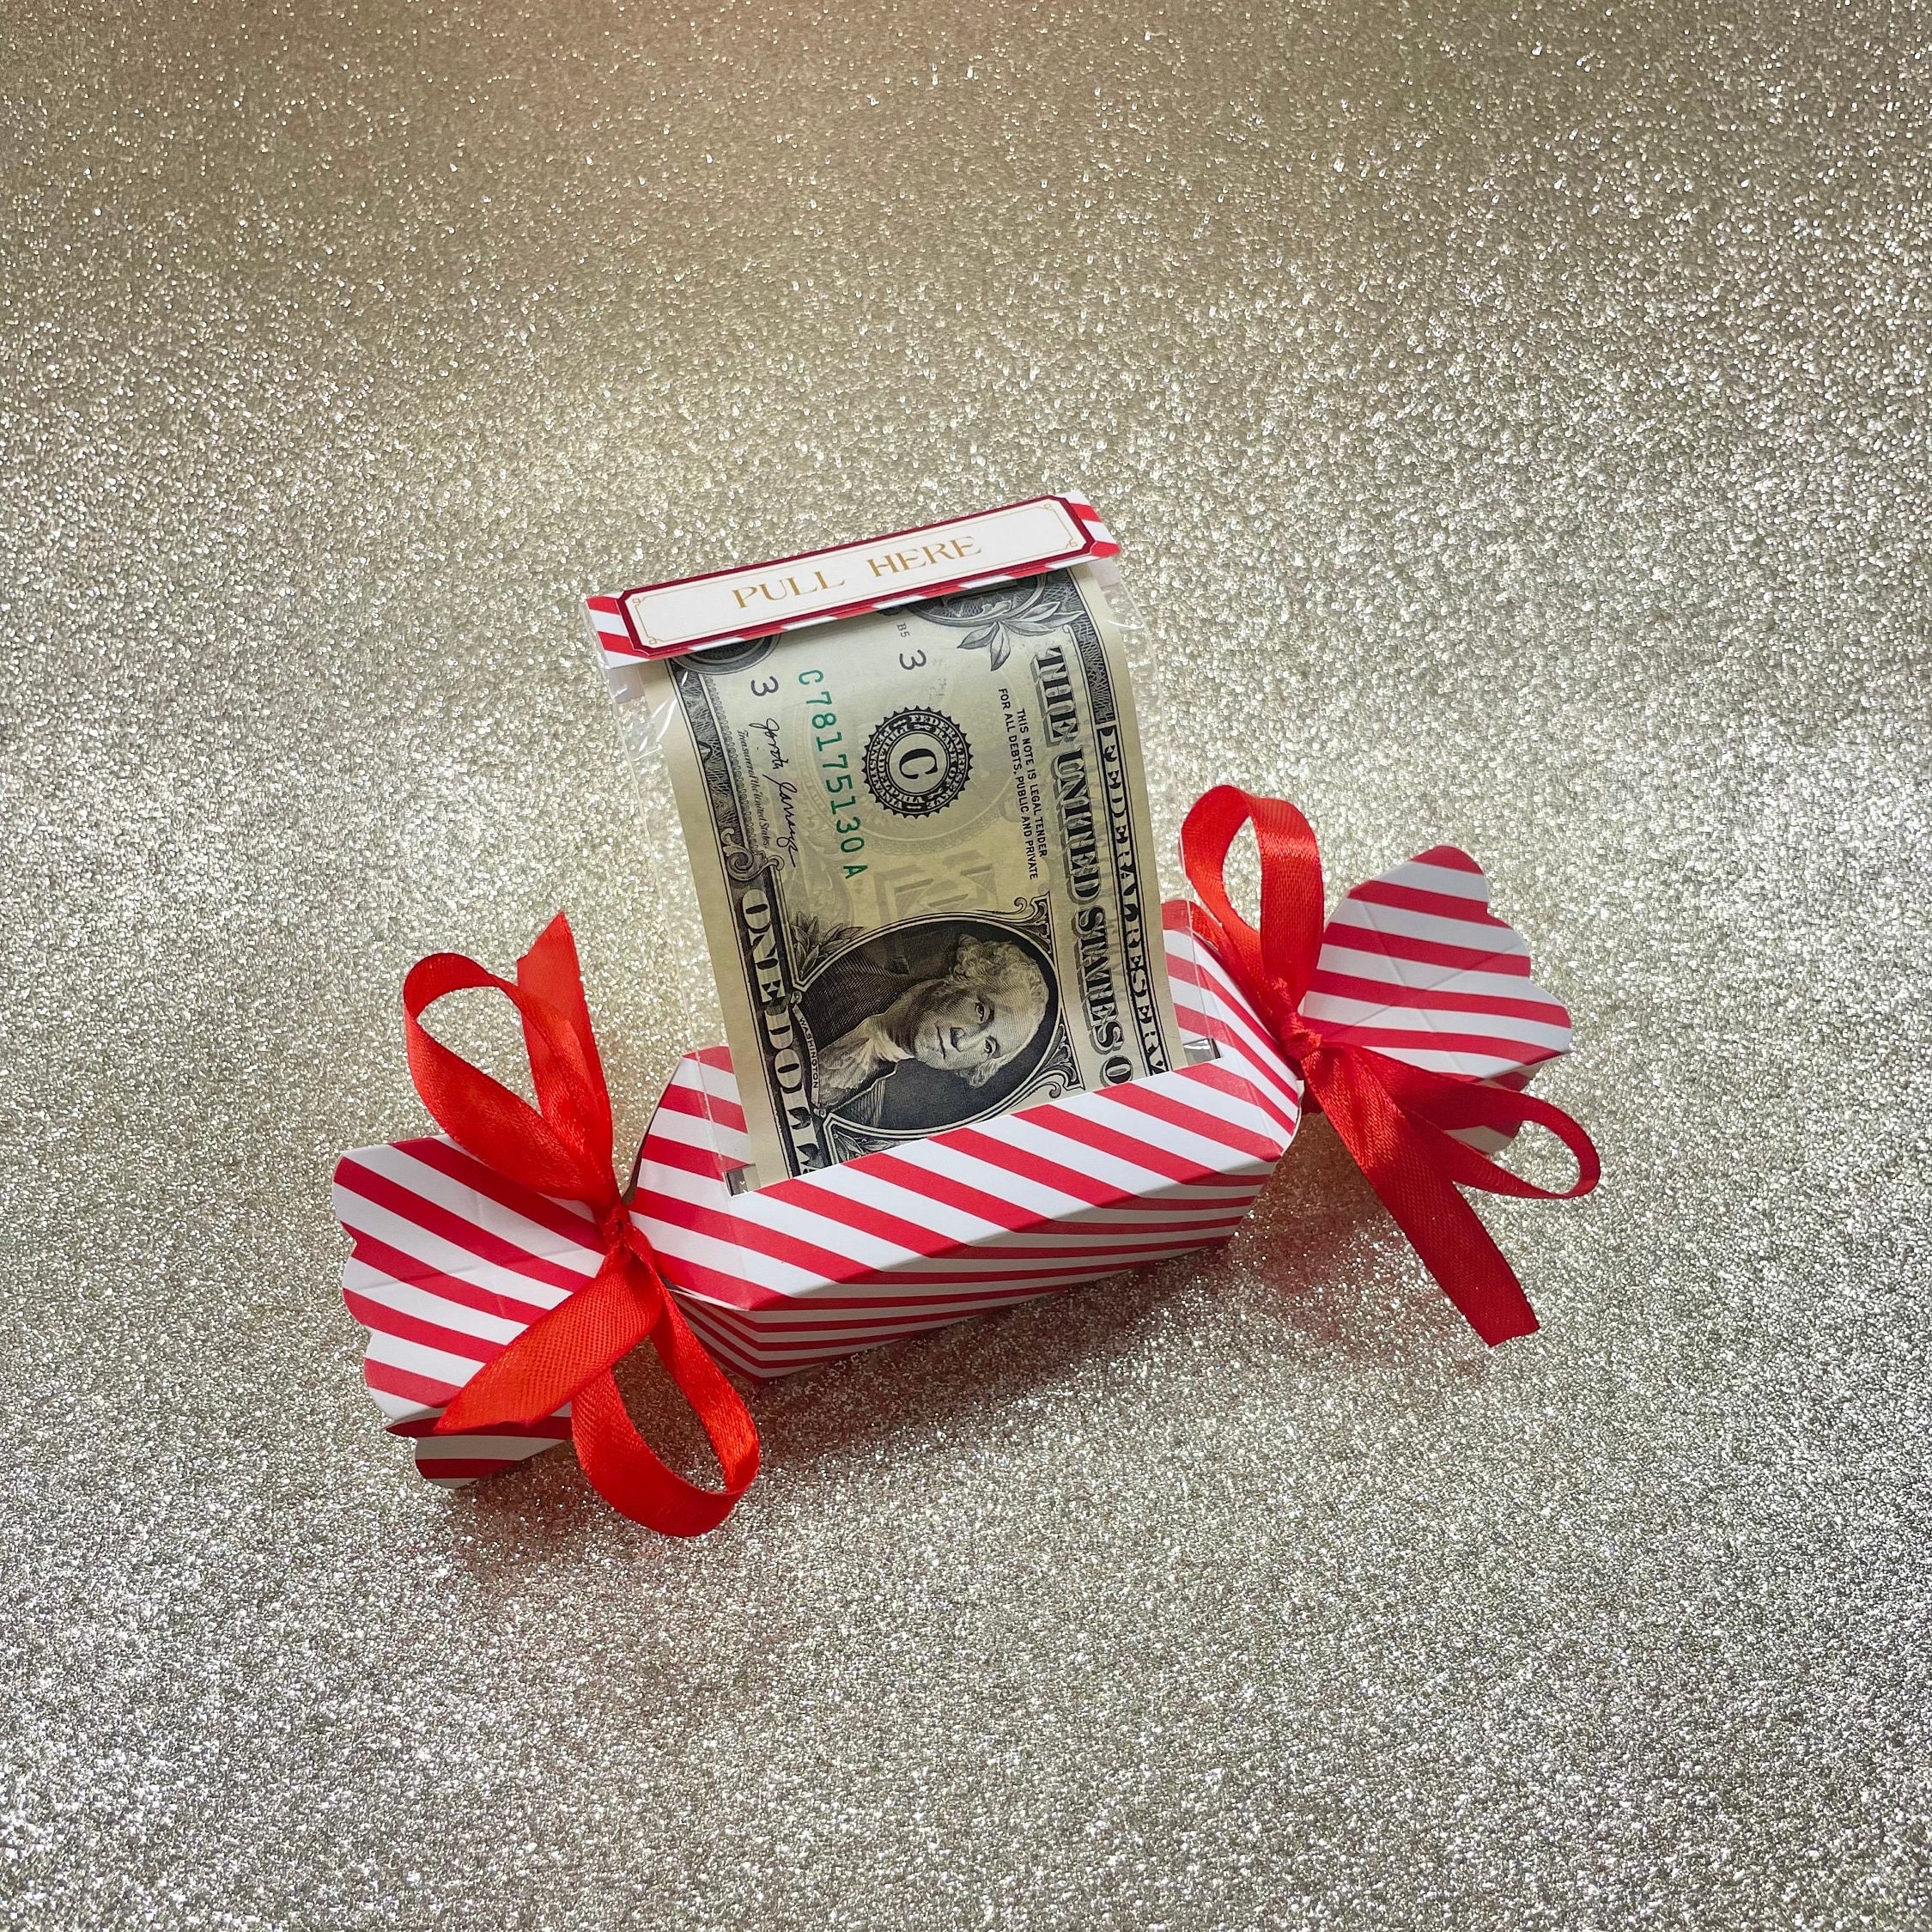 Set of 4 Merry Christmas Black Lump of Coal Money Soap With Real Money  Inside 1, 5, 10, 20 or 100, Pine Scented Stocking Stuffer 